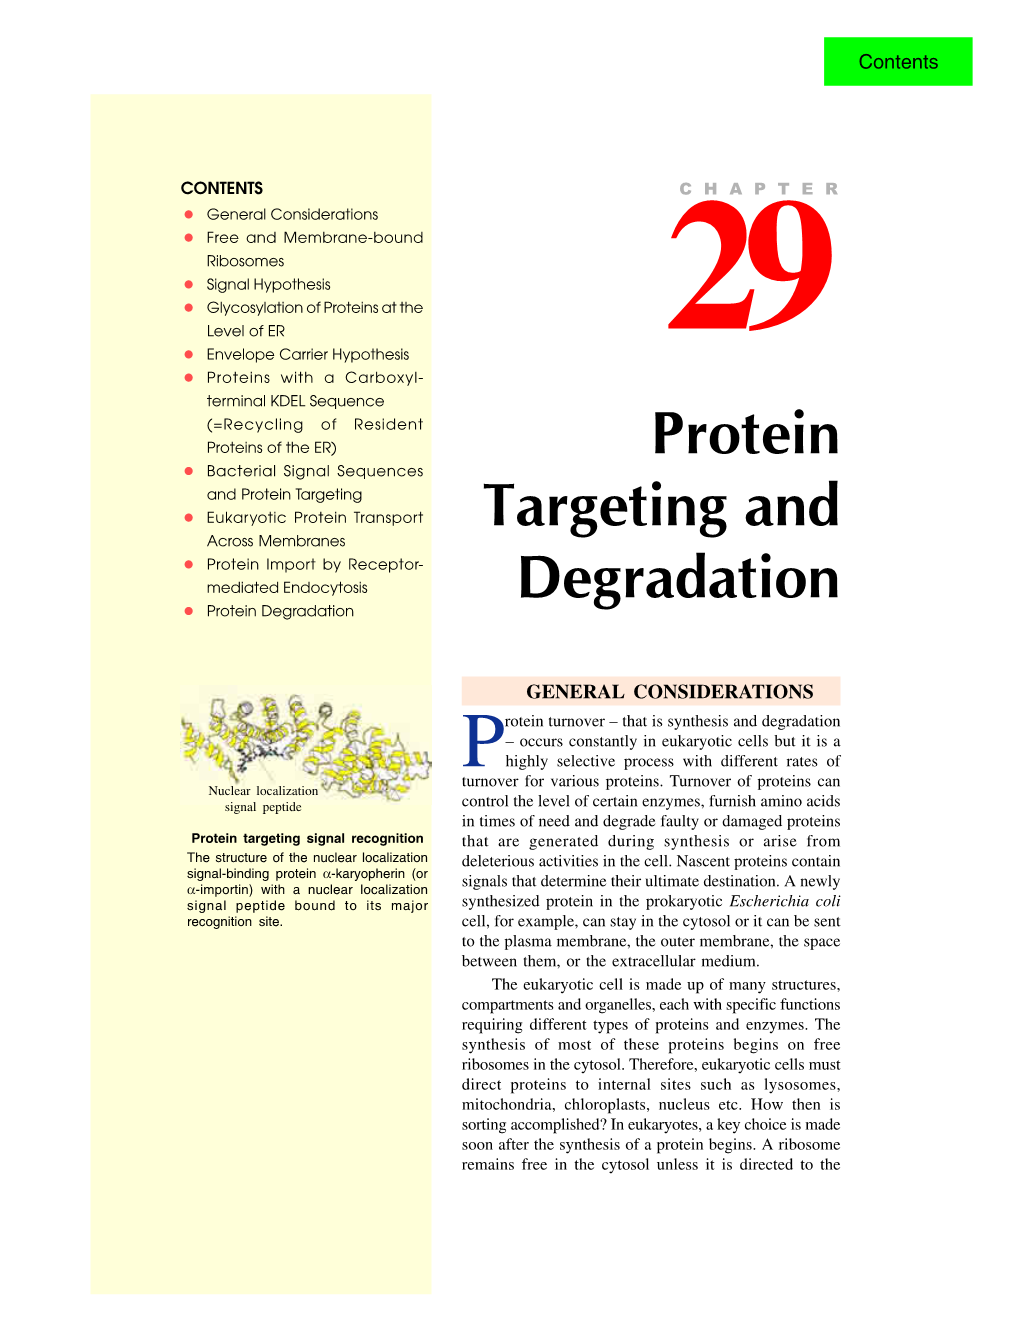 Protein Targeting and Degradation 775